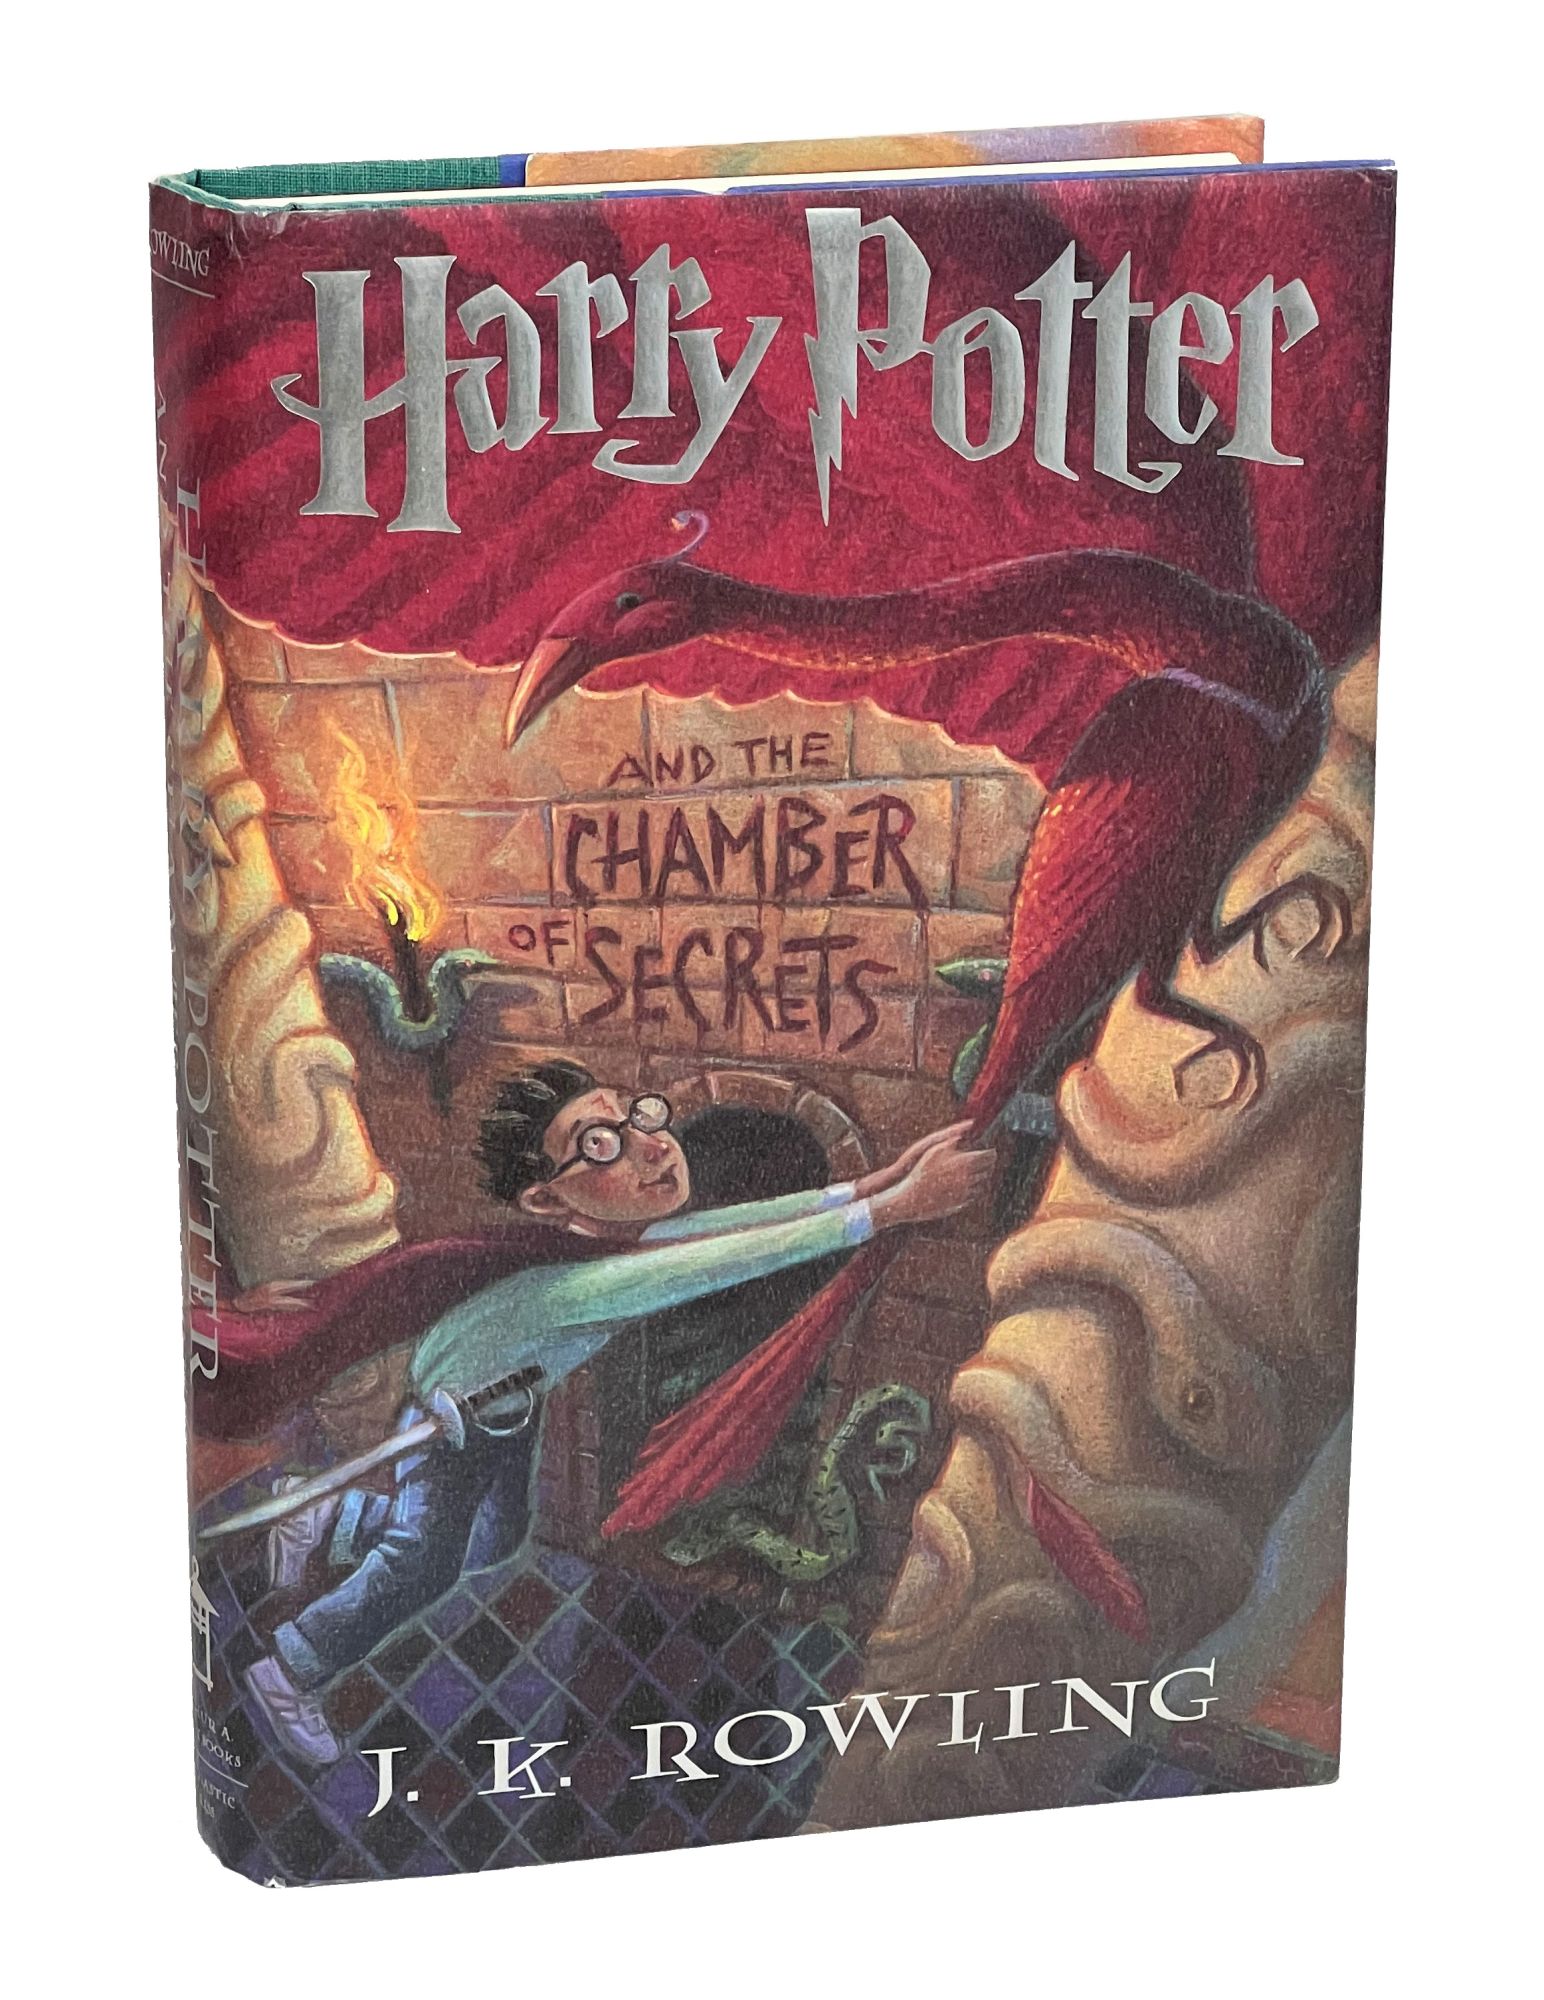 Harry Potter And The Chamber Of Secrets - Rowling, J.K.